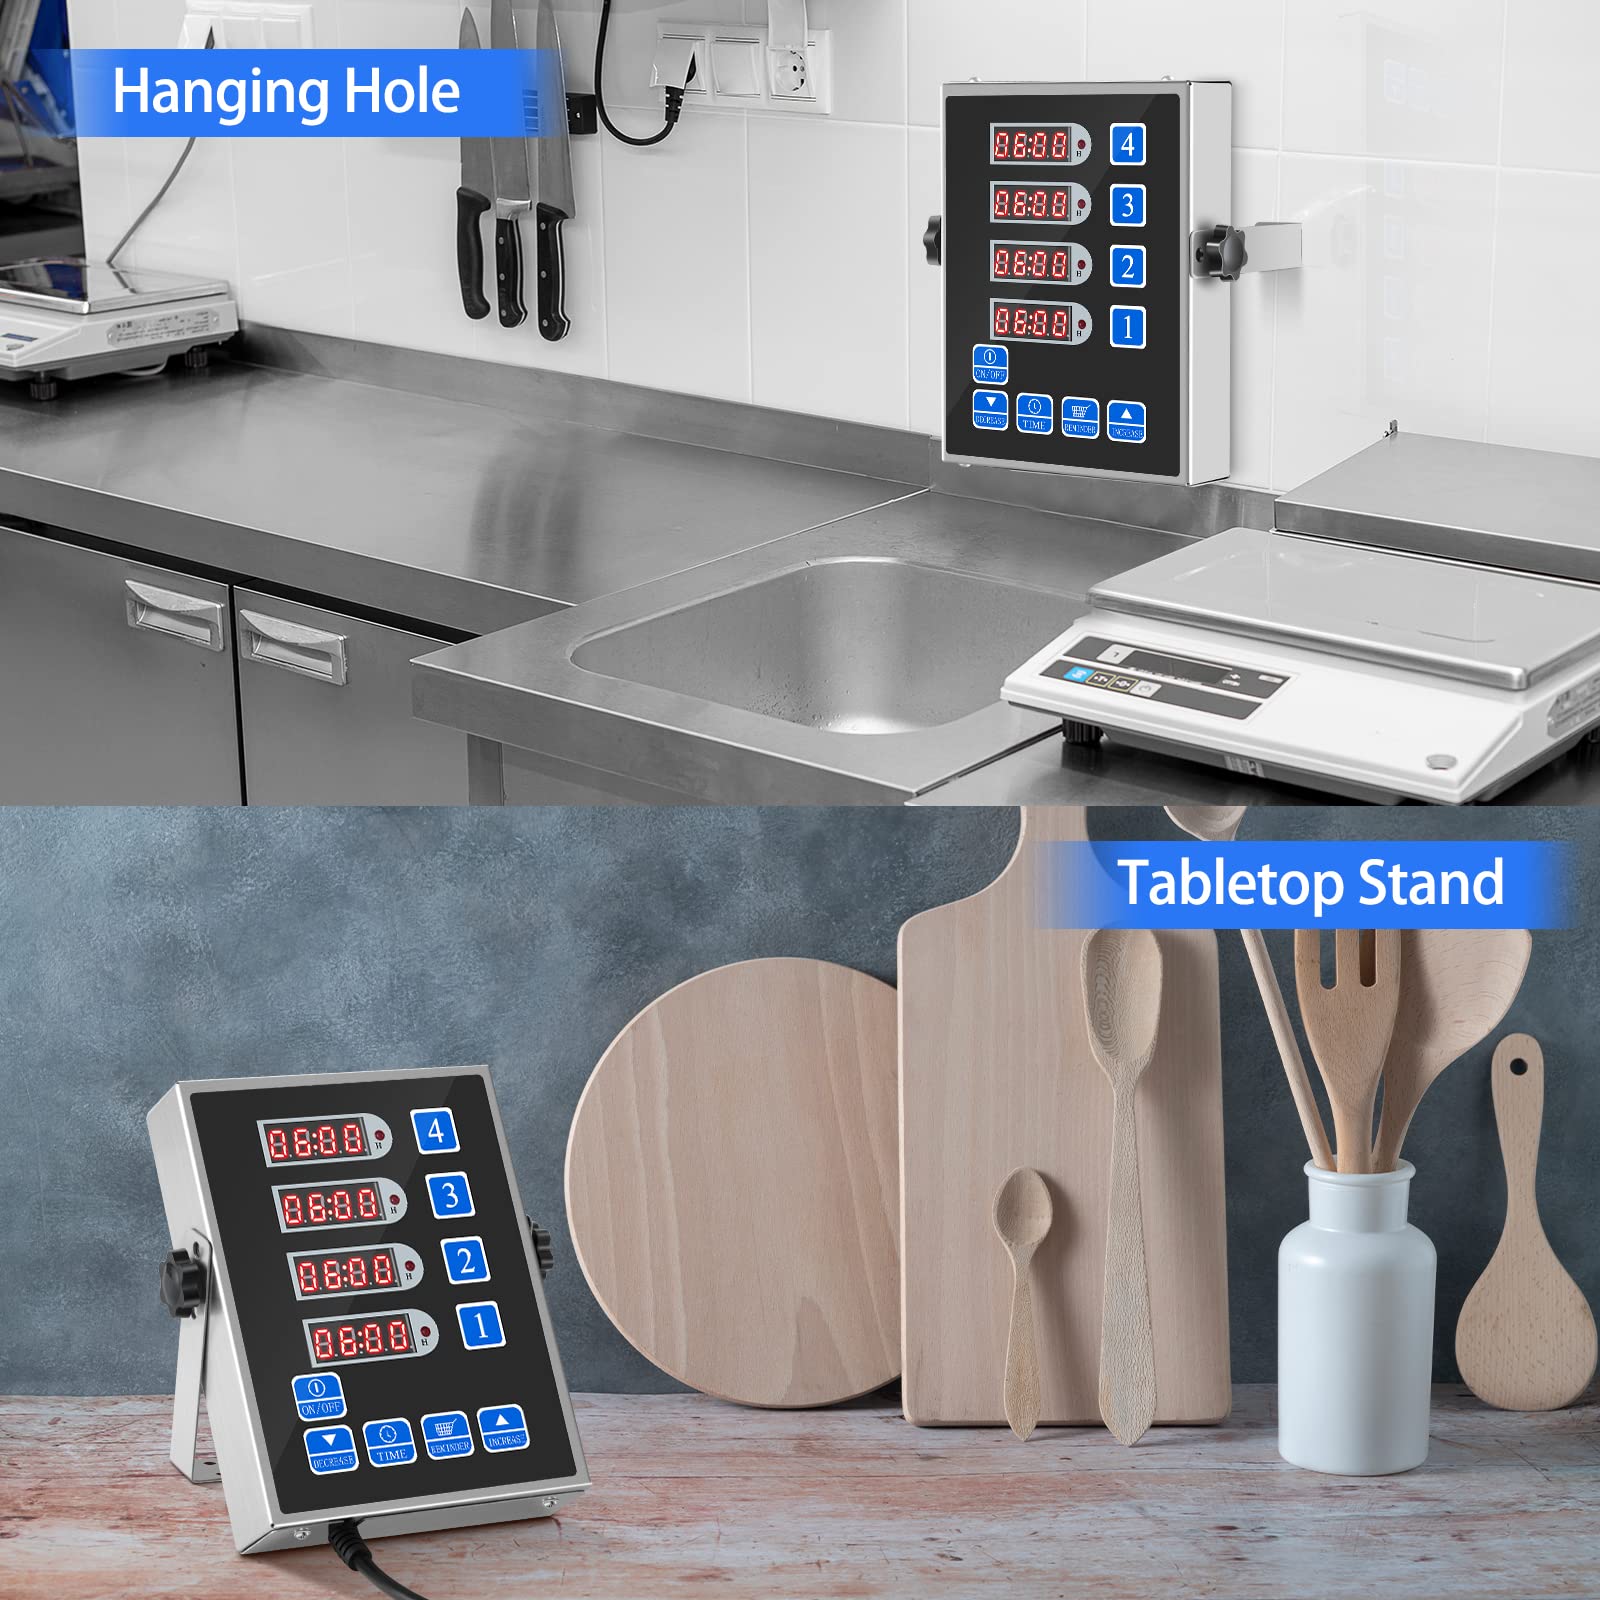 QEERBSIN 4 Channel Commercial Kitchen Cooking Countdown Timer with Clear Display Loud Alarm Reminder for Restaurant Multiple Events